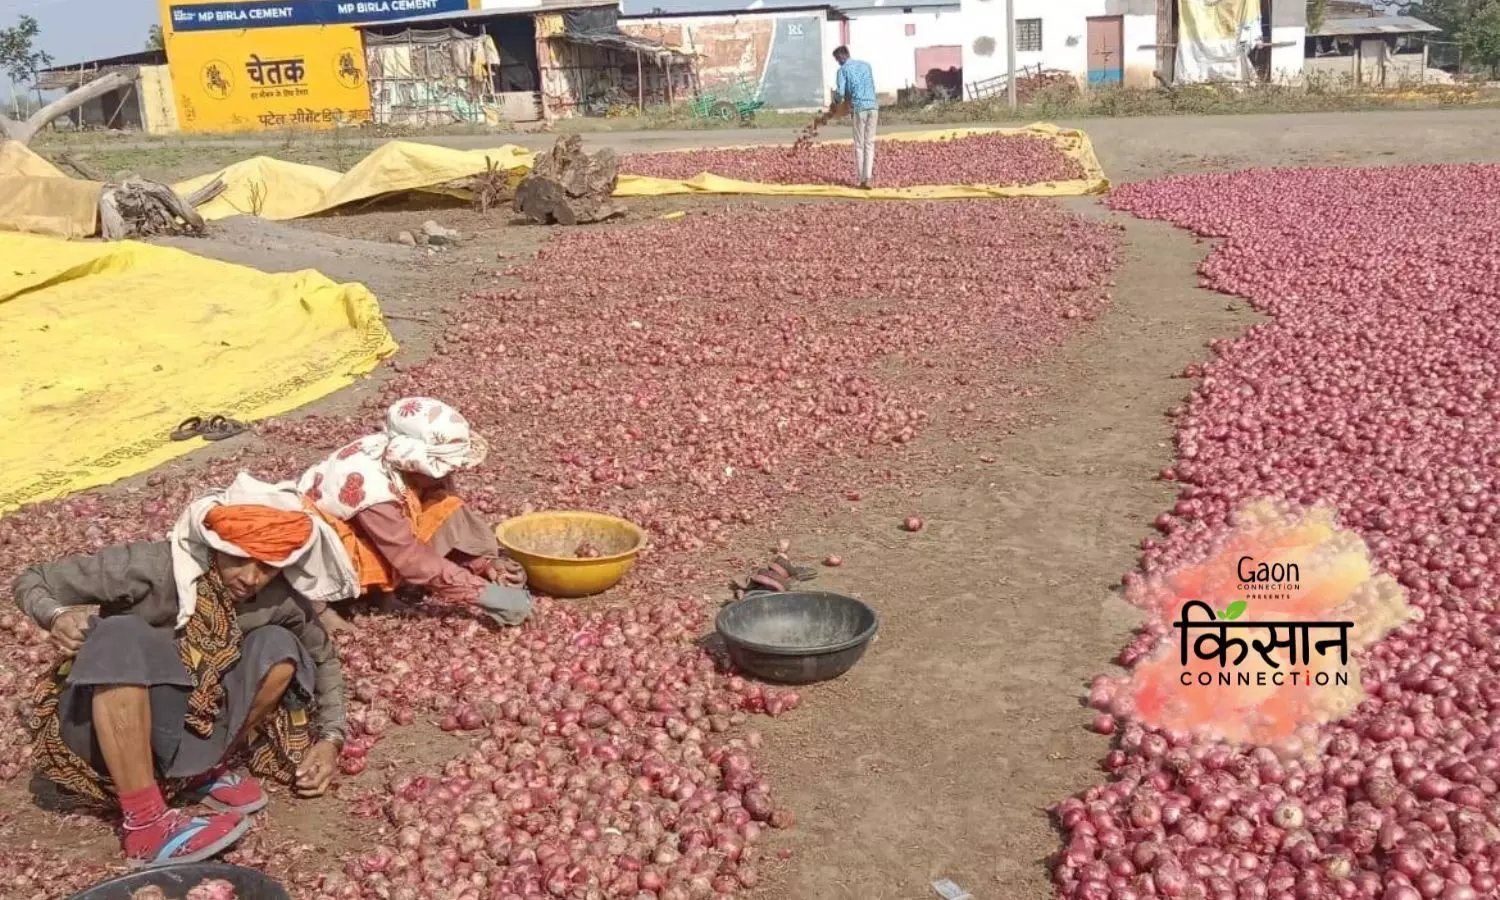 Onion Export Ban: Farmers in Maharashtra and Madhya Pradesh, Top Onion Producing States, Launch Protests